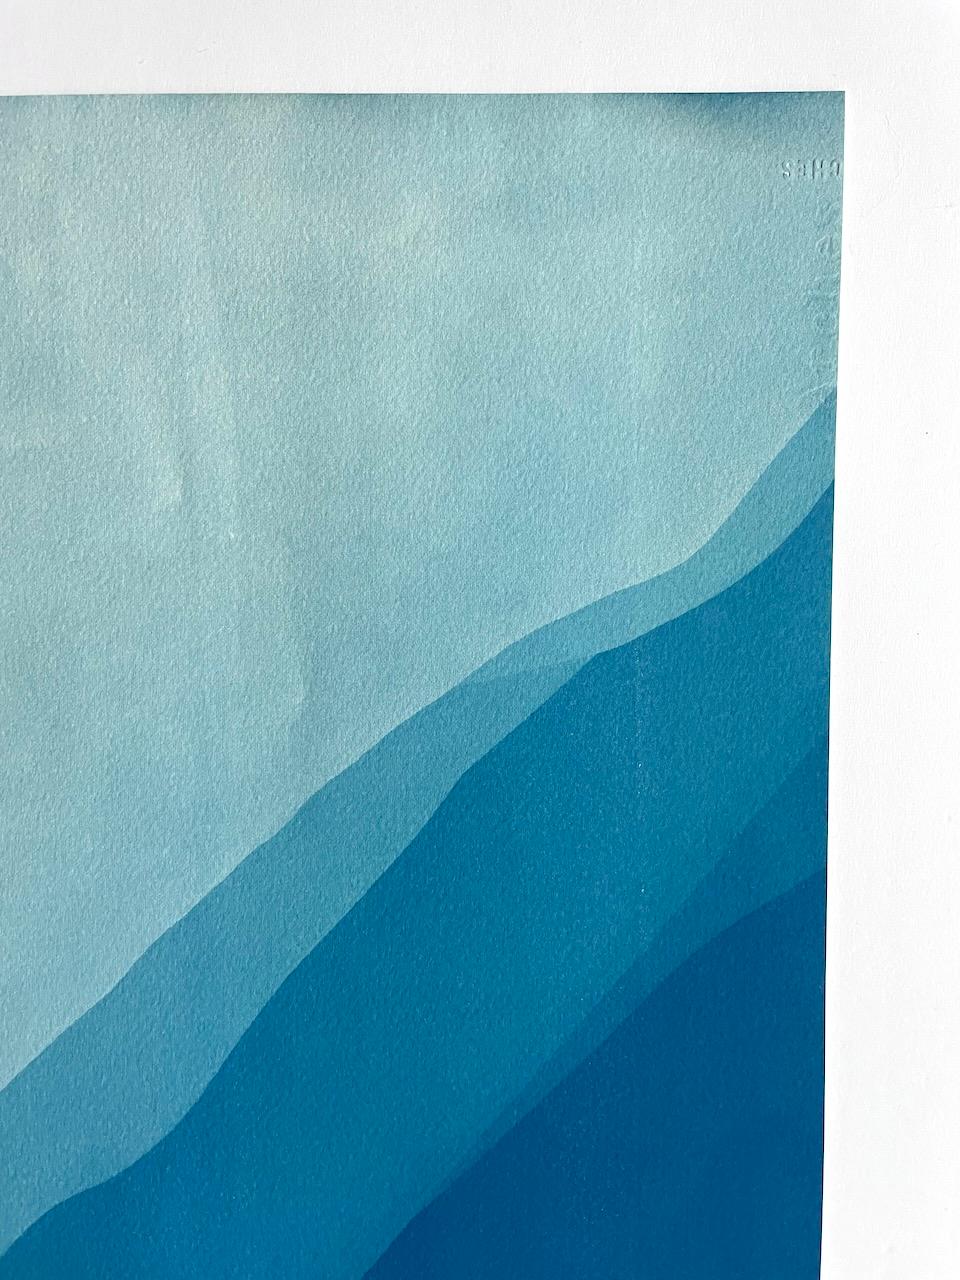 Sea Cliffs 7 (Hand-printed 40 x 20 inch abstract cyanotype) For Sale 8